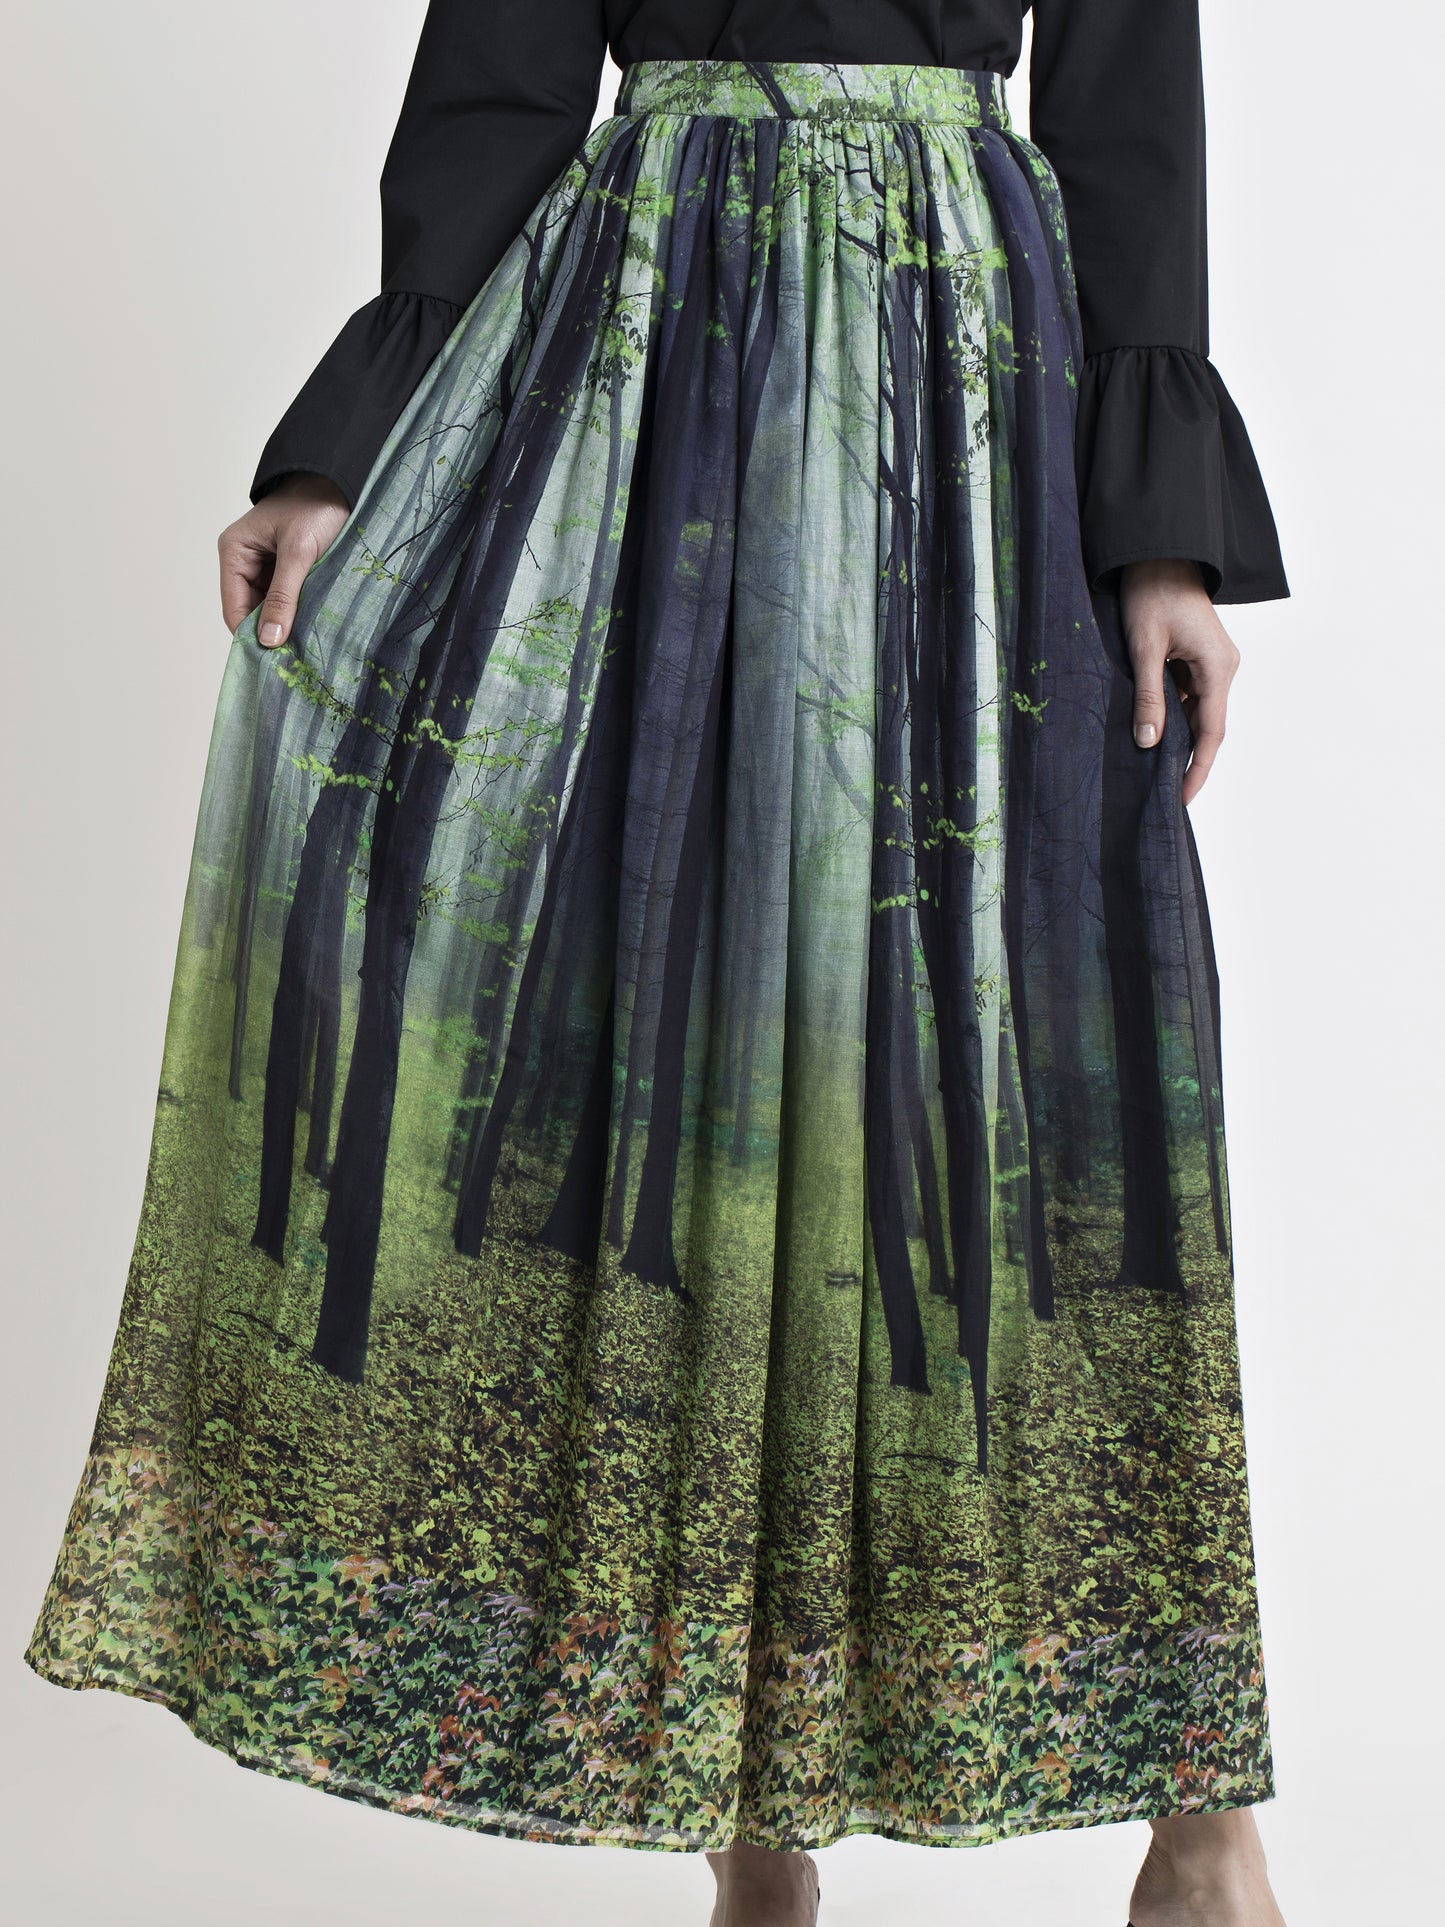 Lower body view of a female model wearing a black cotton flared cuff dress shirt, and a long cotton forest print gathered skirt, from the RÉZO women's collection.